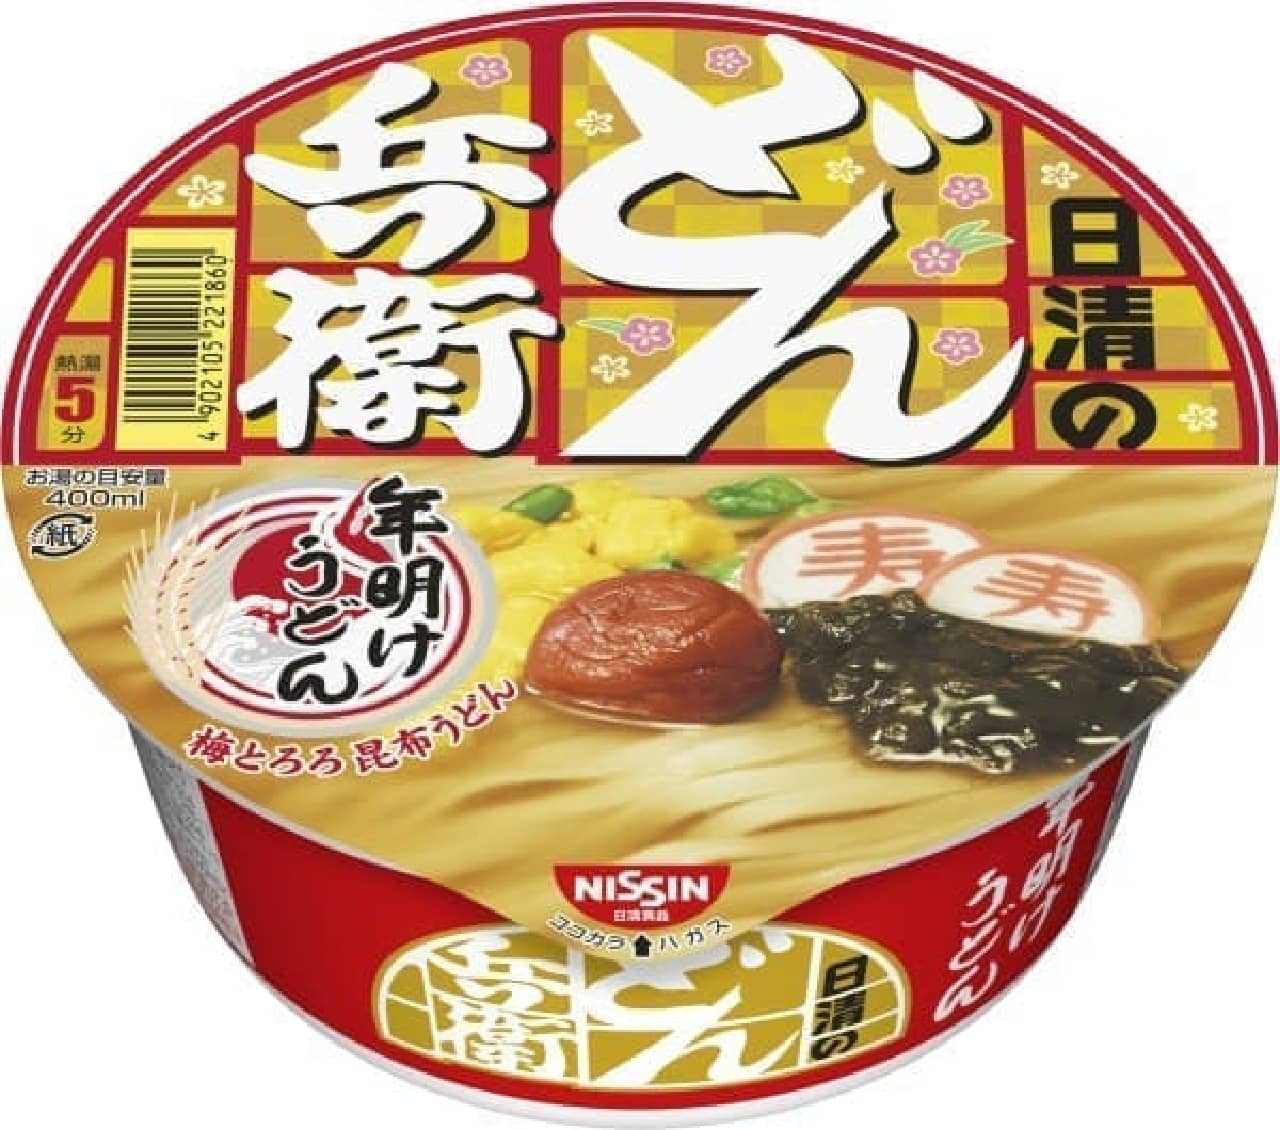 Nissin Foods "Nissin Donbei New Year Udon"